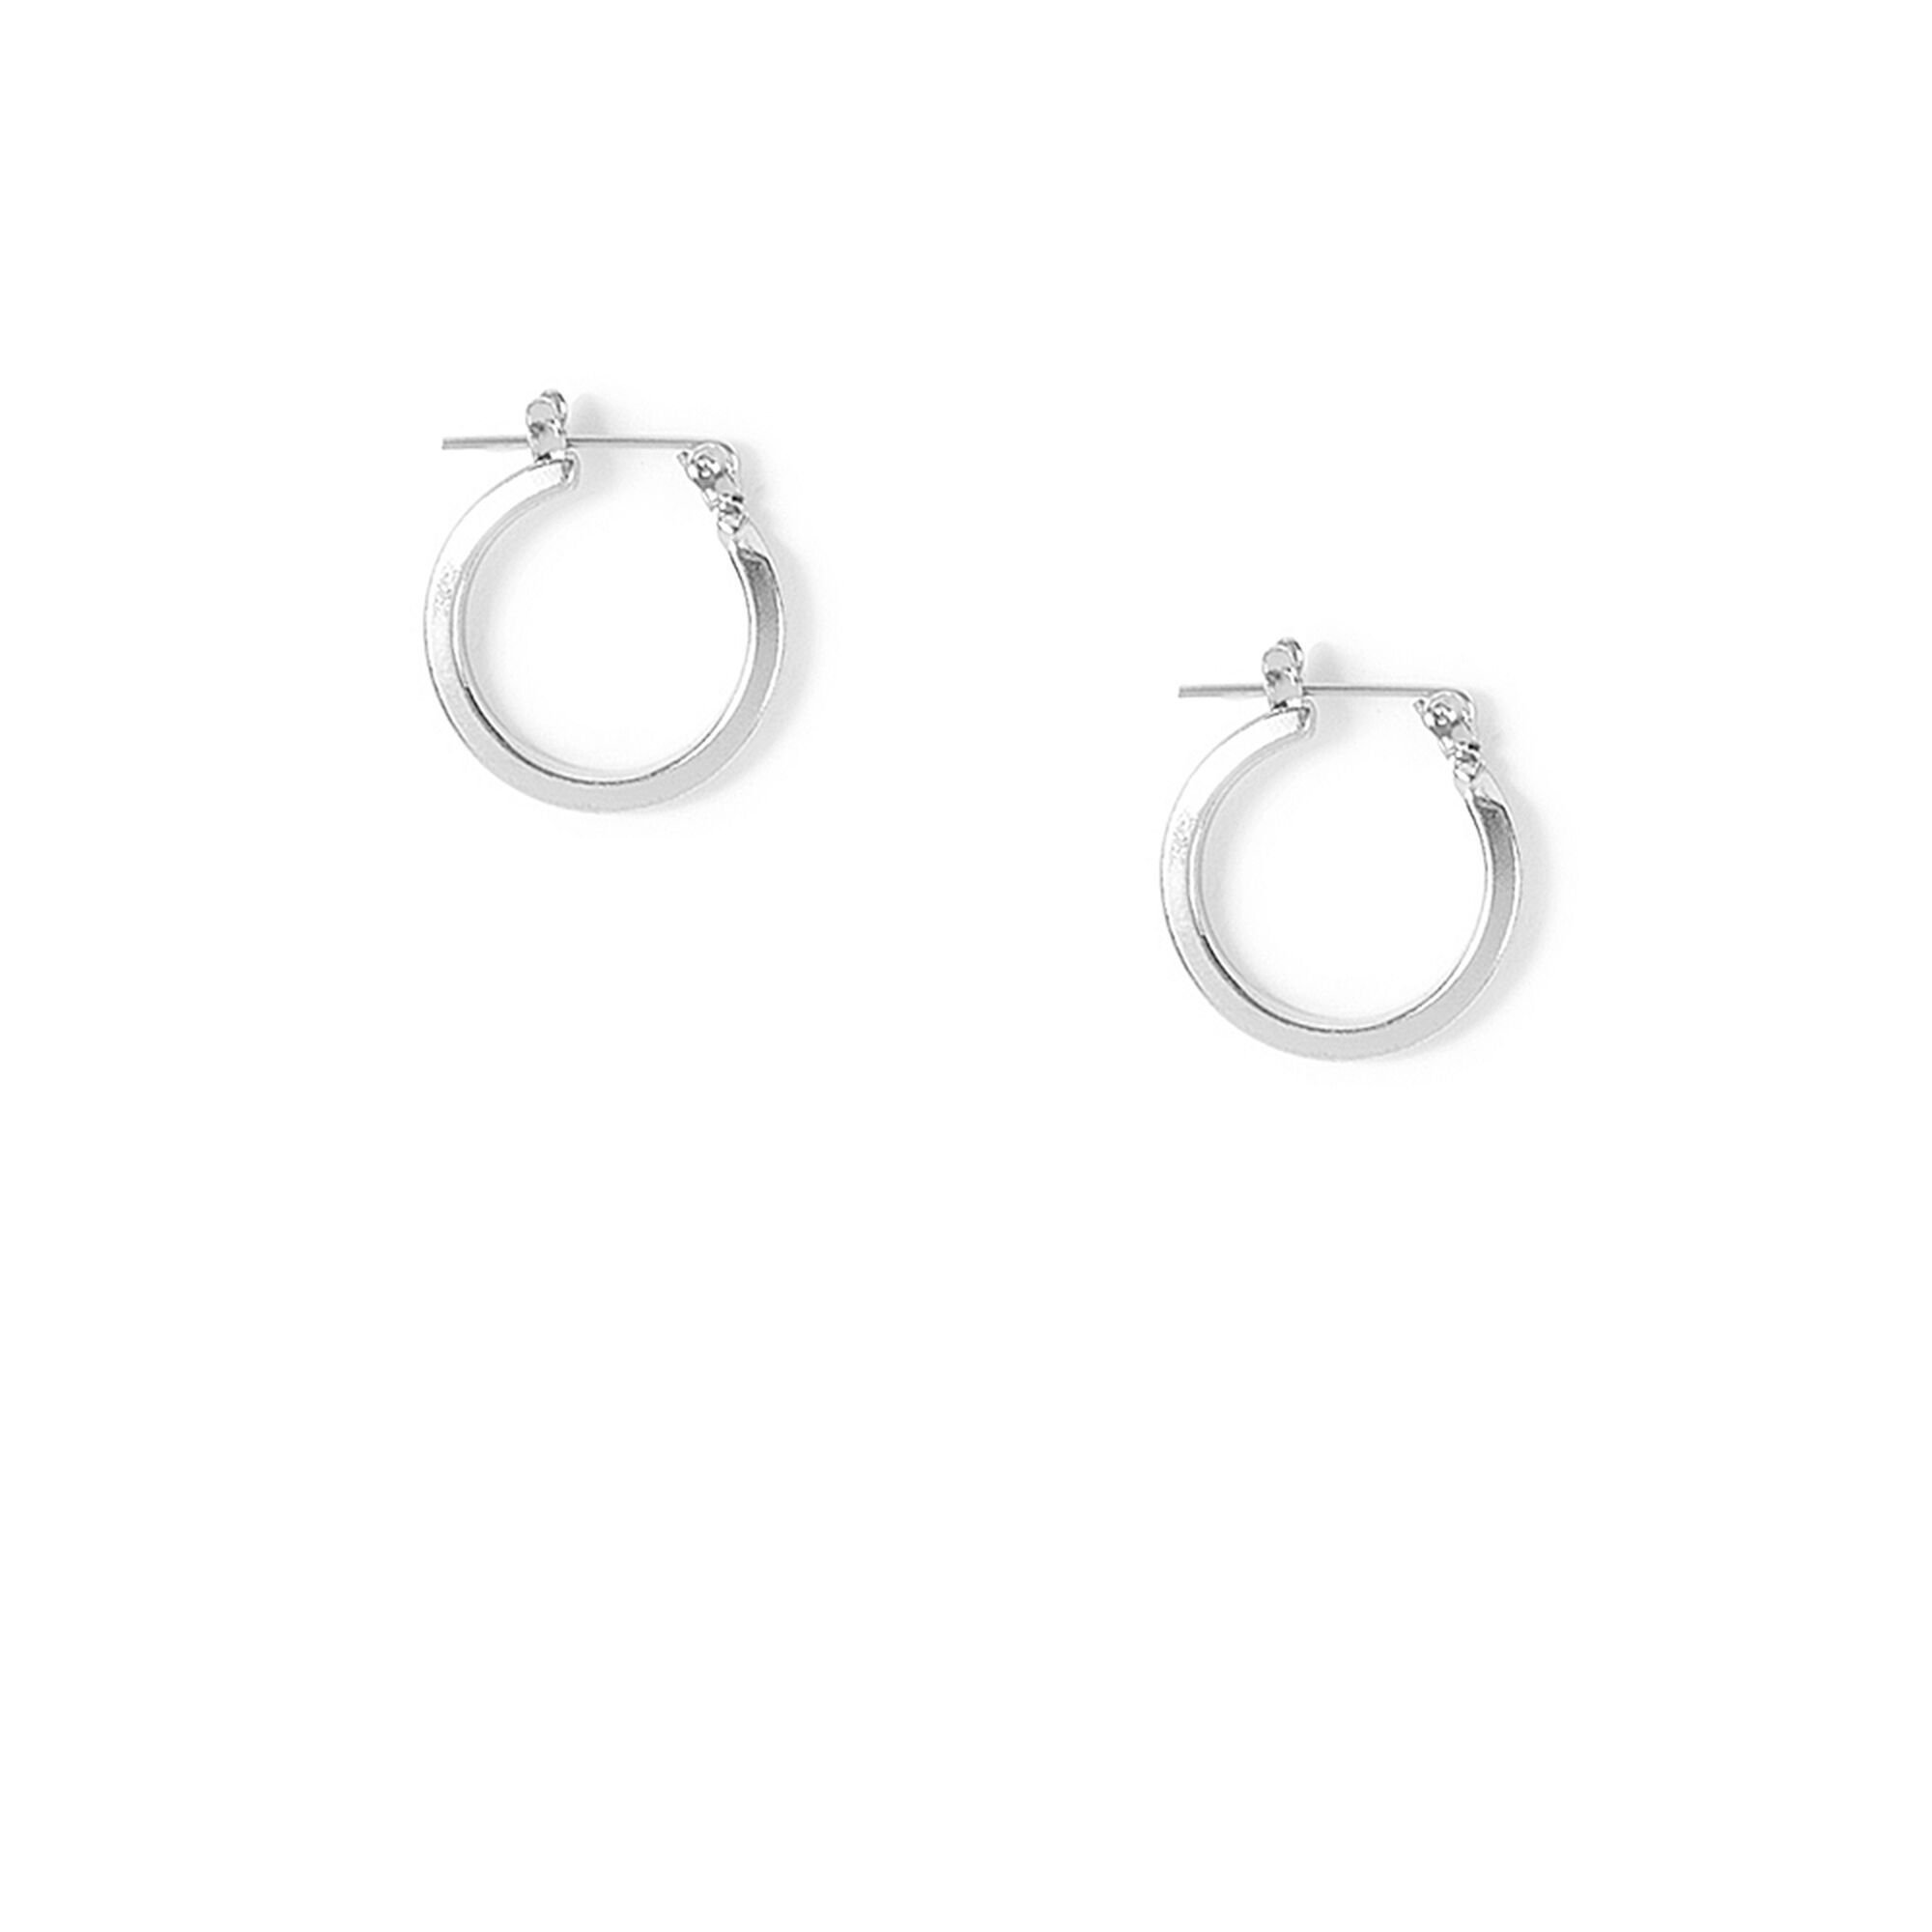 View Claires Tone 15MM Hoop Earrings Silver information